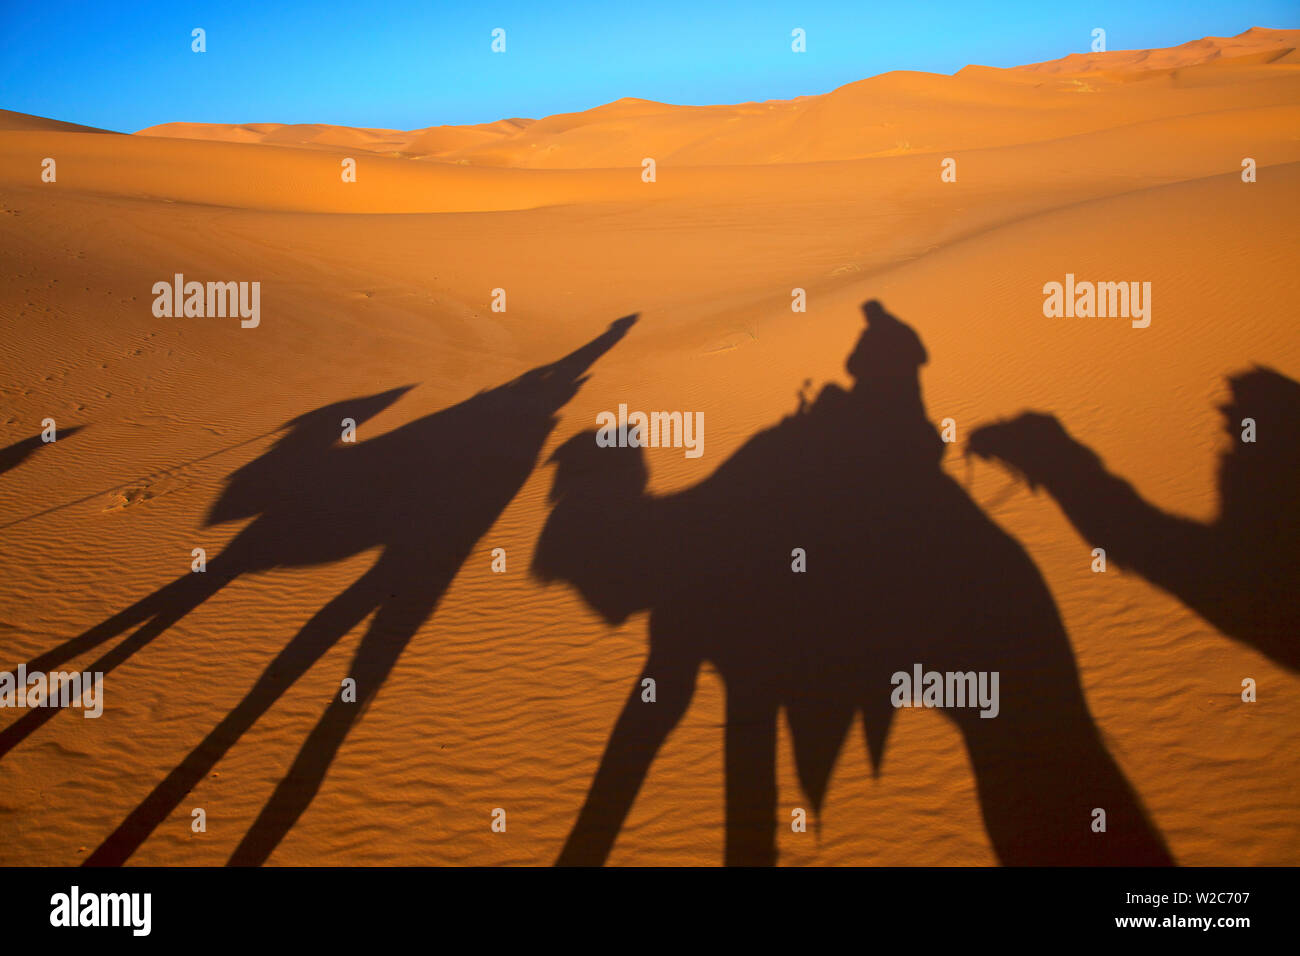 Shadows Of Camels And Riders In The Desert, Merzouga, Morocco, North Africa Stock Photo